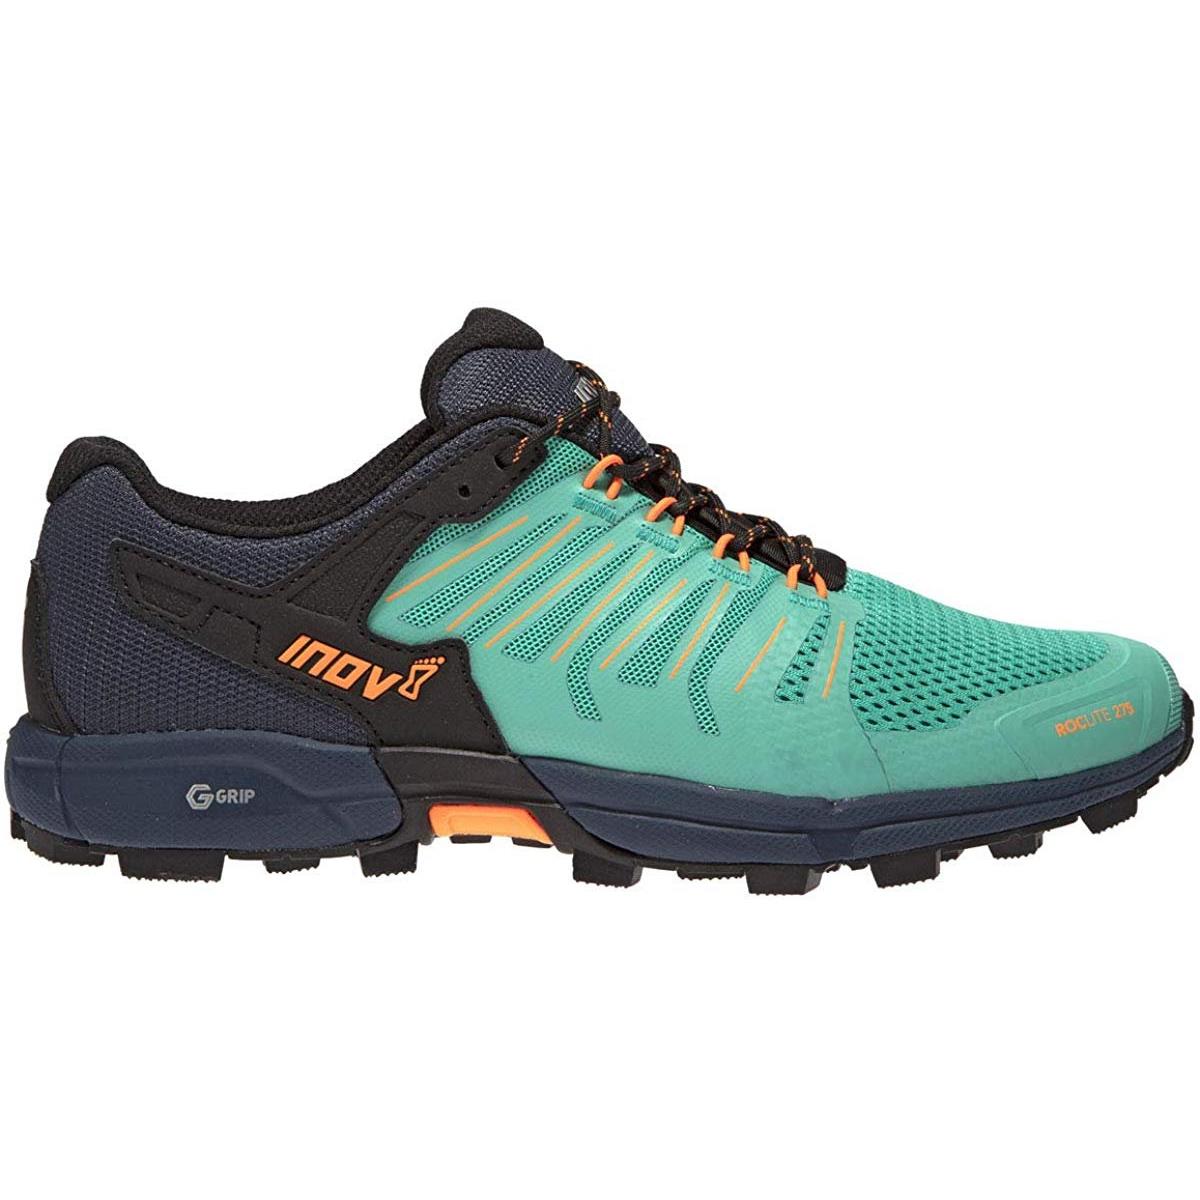 inov-8 shoes  - Teal/Navy 0